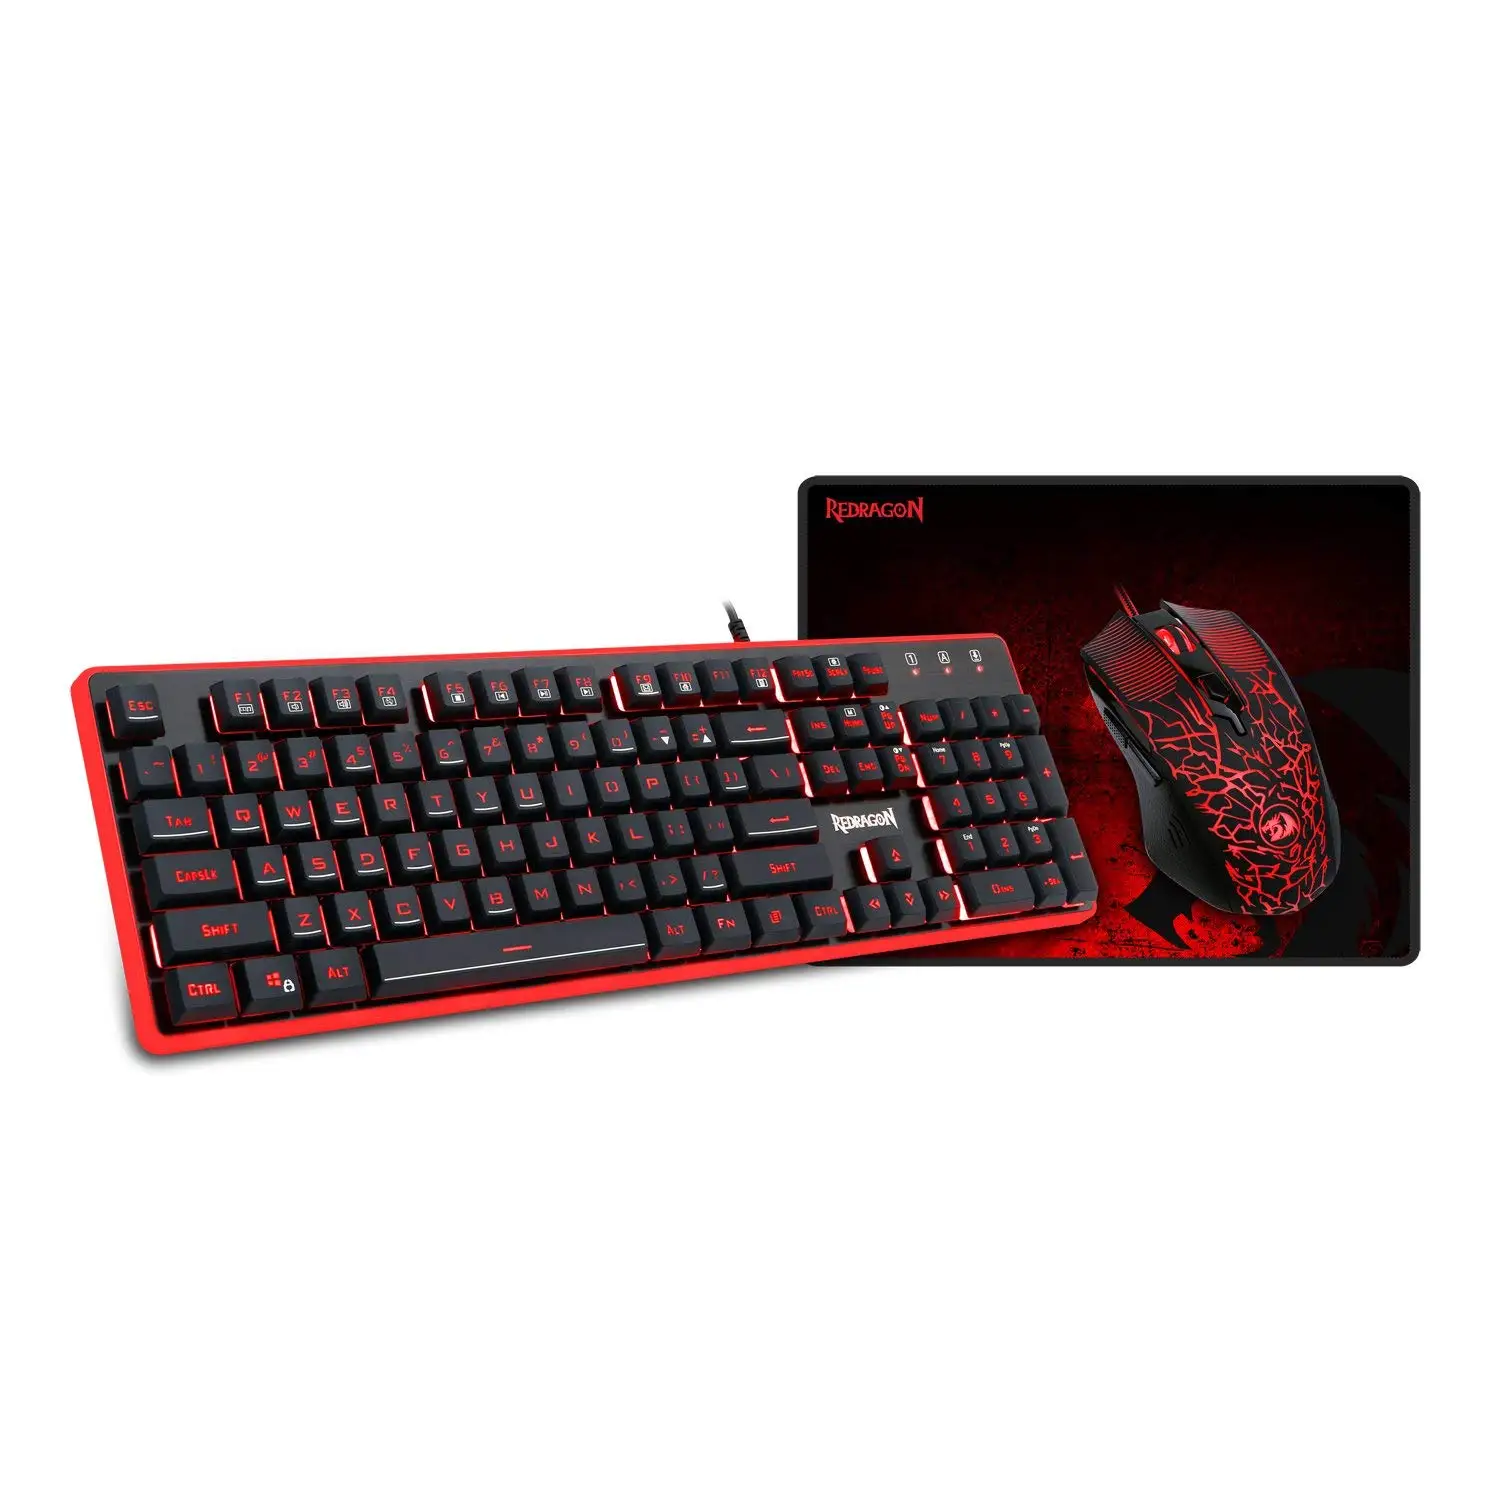 7 colors backlight keyboard K509 and backlight  mouse M608 and mousepad P016 gaming Combos